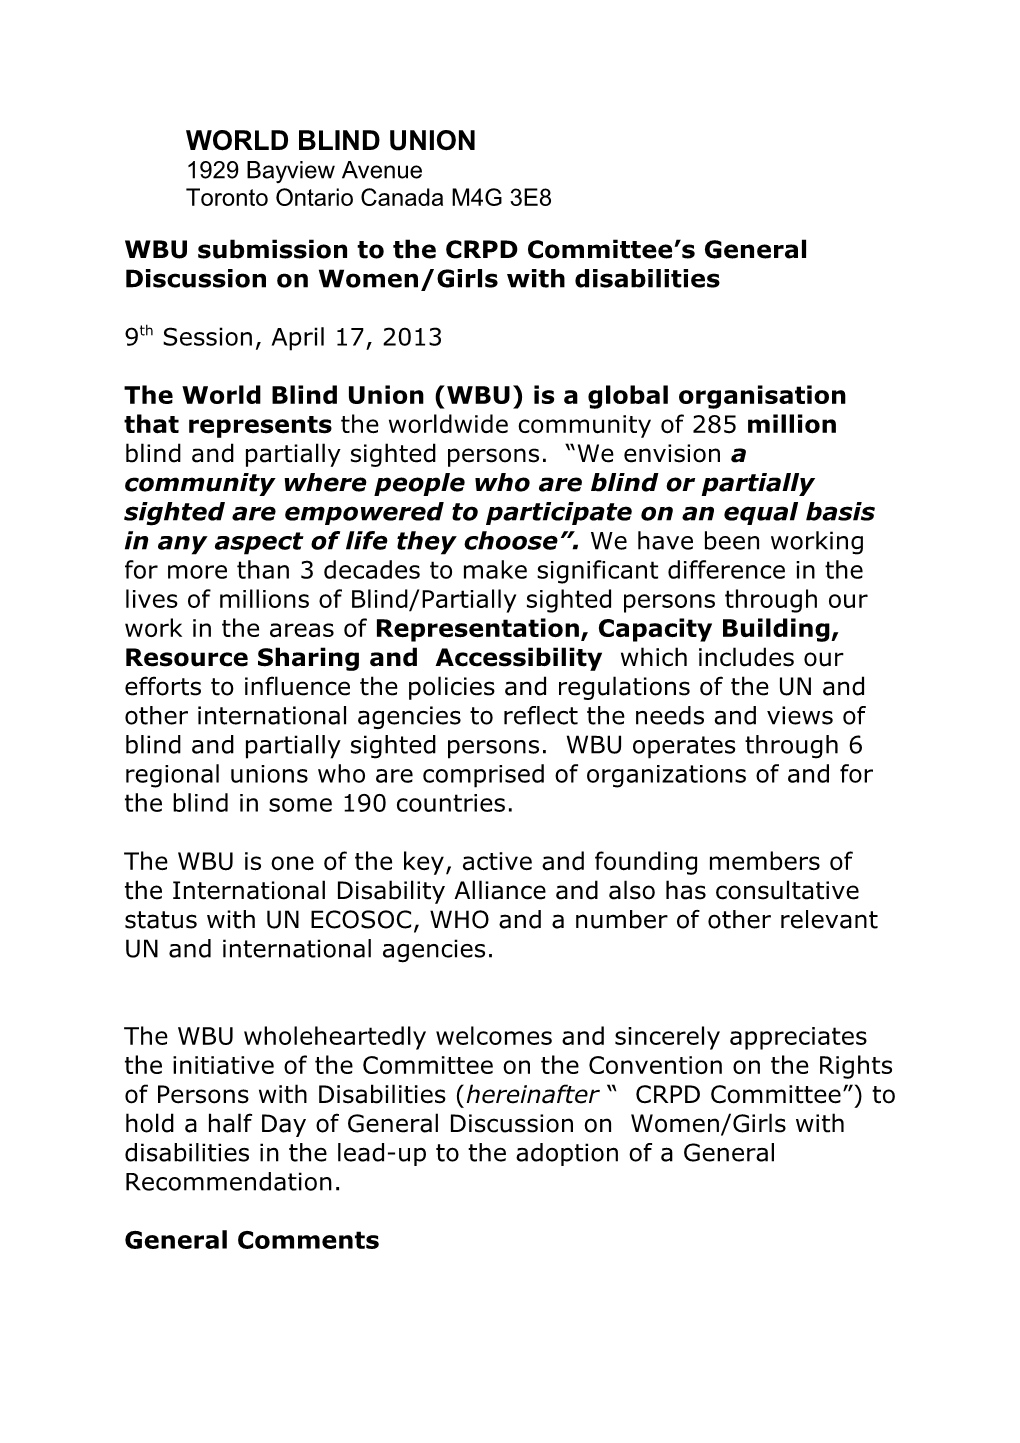 WBU Submission to the CRPD Committee S General Discussion on Women/Girls with Disabilities